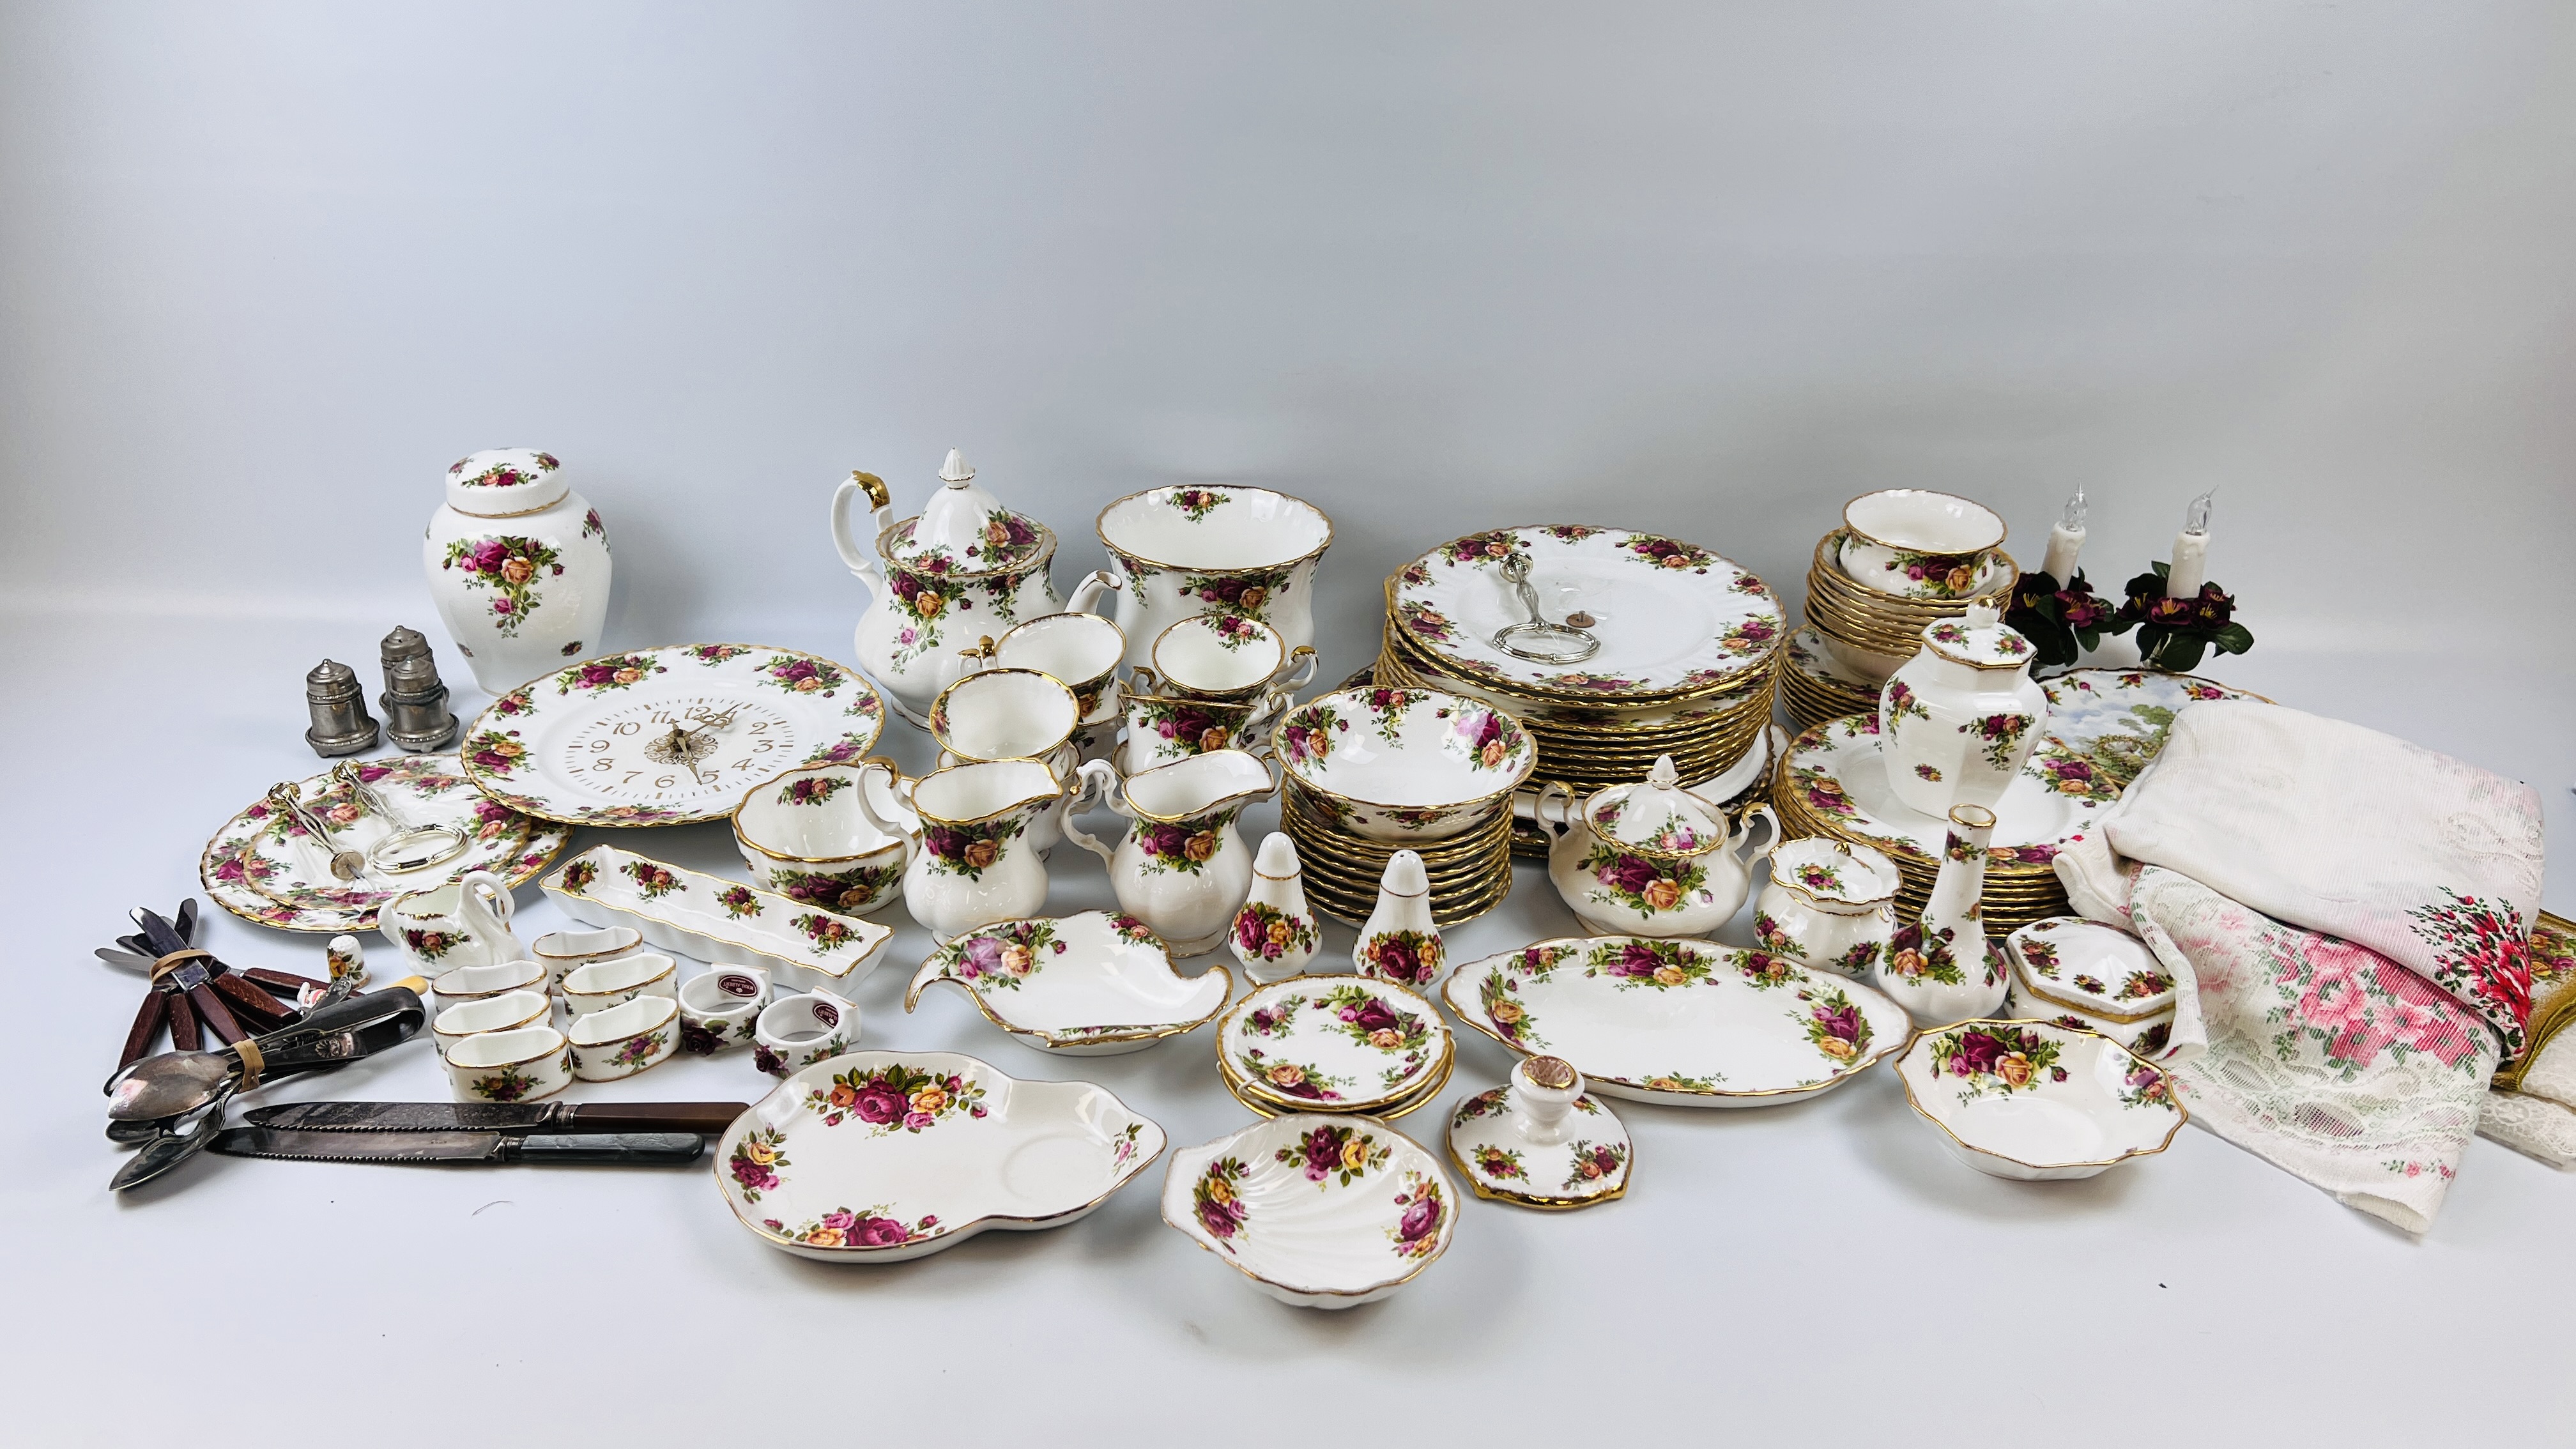 APPROXIMATELY 80 PIECES OF ROYAL ALBERT OLD COUNTRY ROSE TEA AND DINNER WARE AND CABINET ORNAMENTS